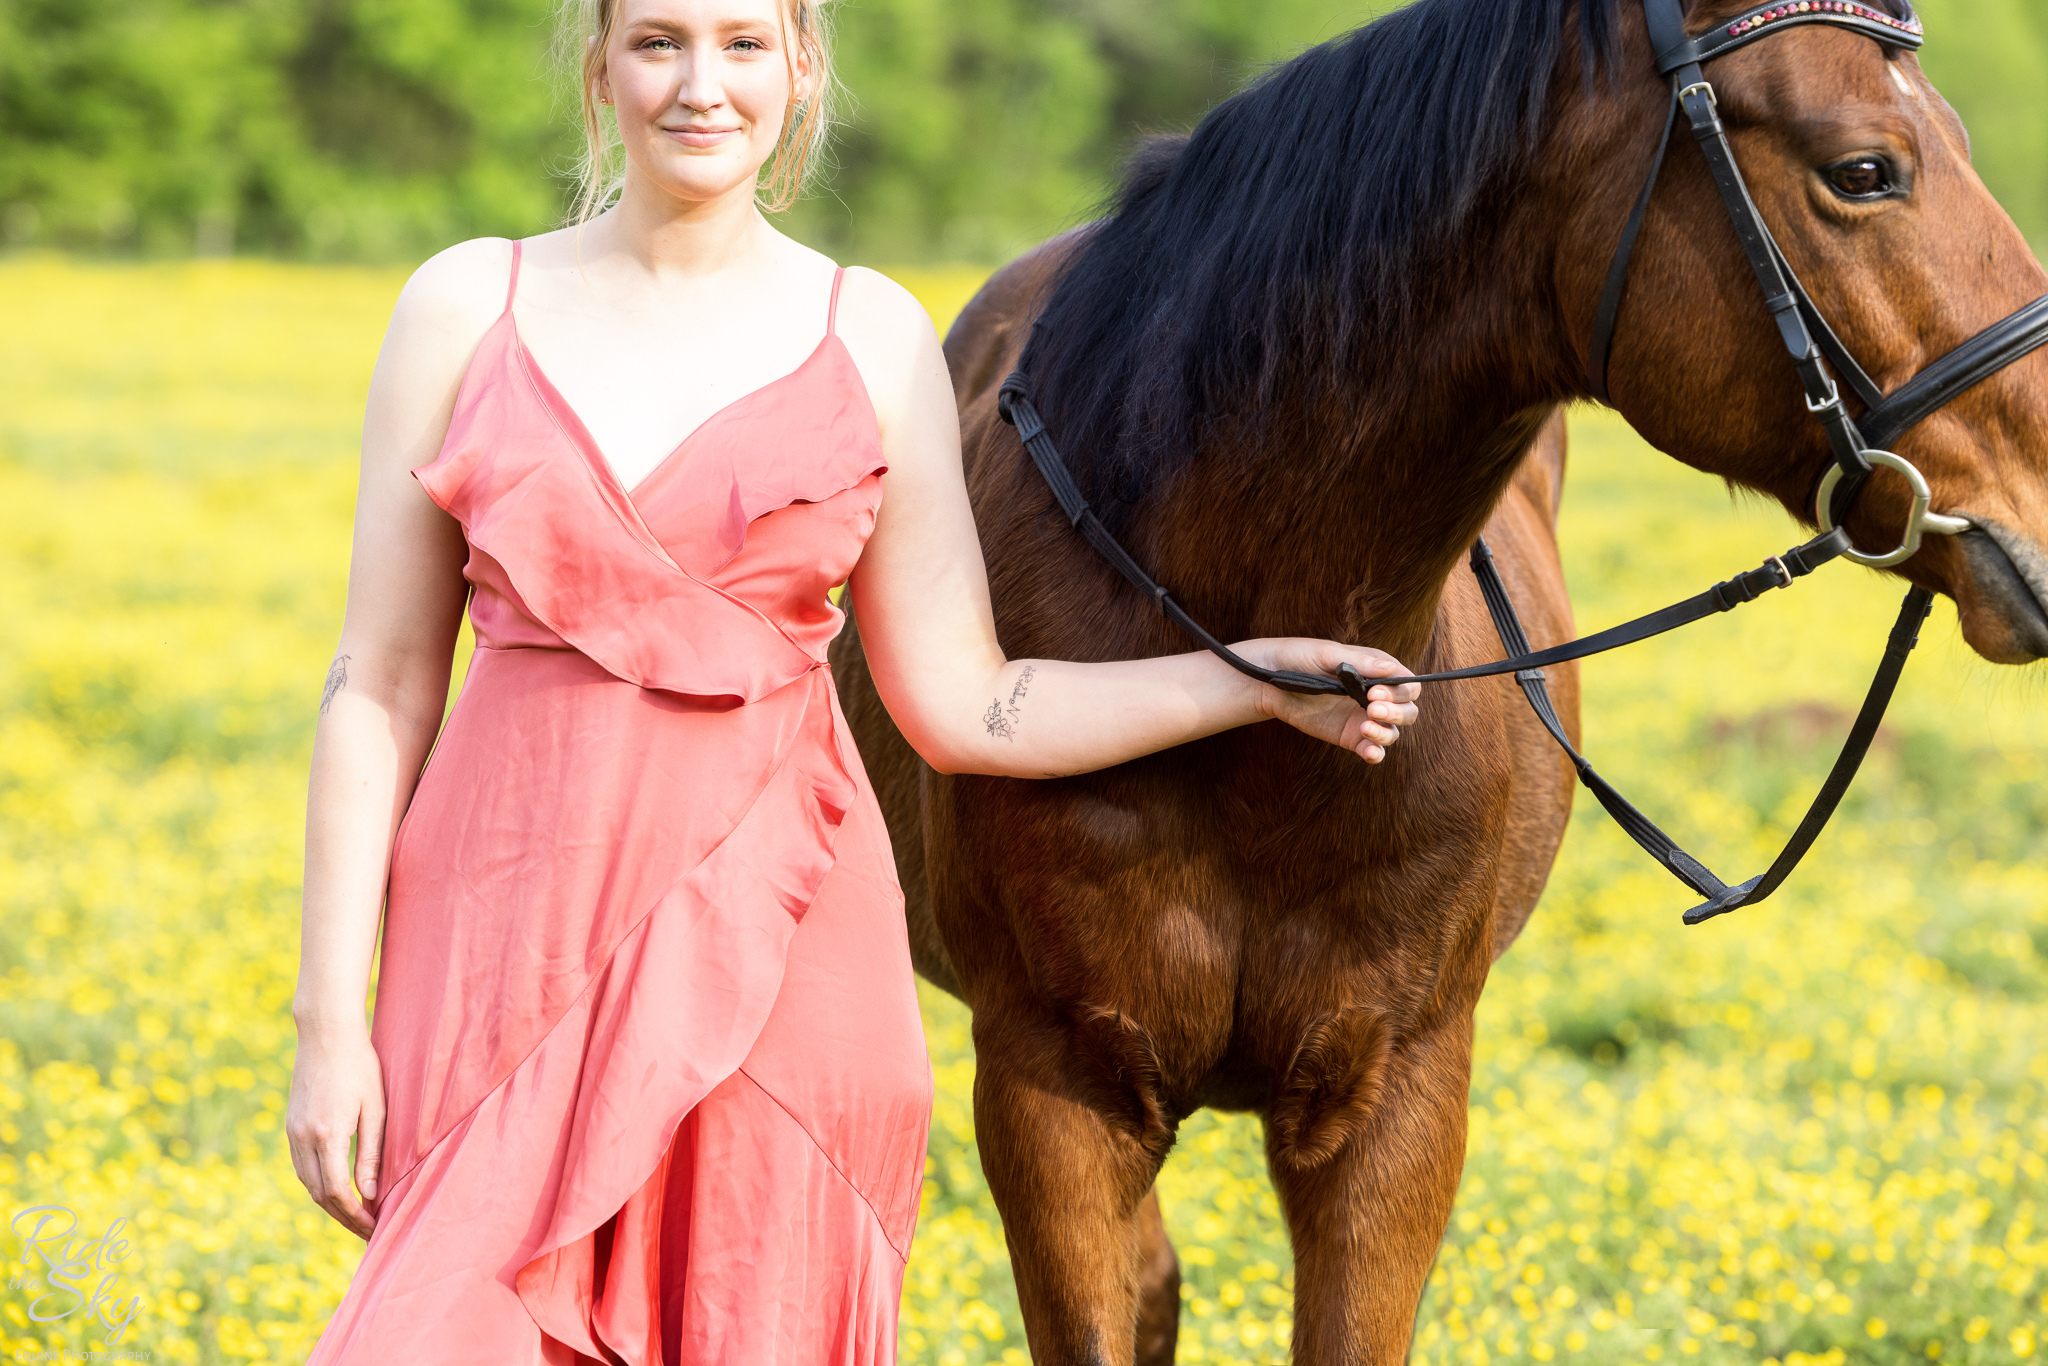 Woman in dress and horse in bridle standing in field of yellow flowers with tattoo of horse's kill pen number tattooed on arm